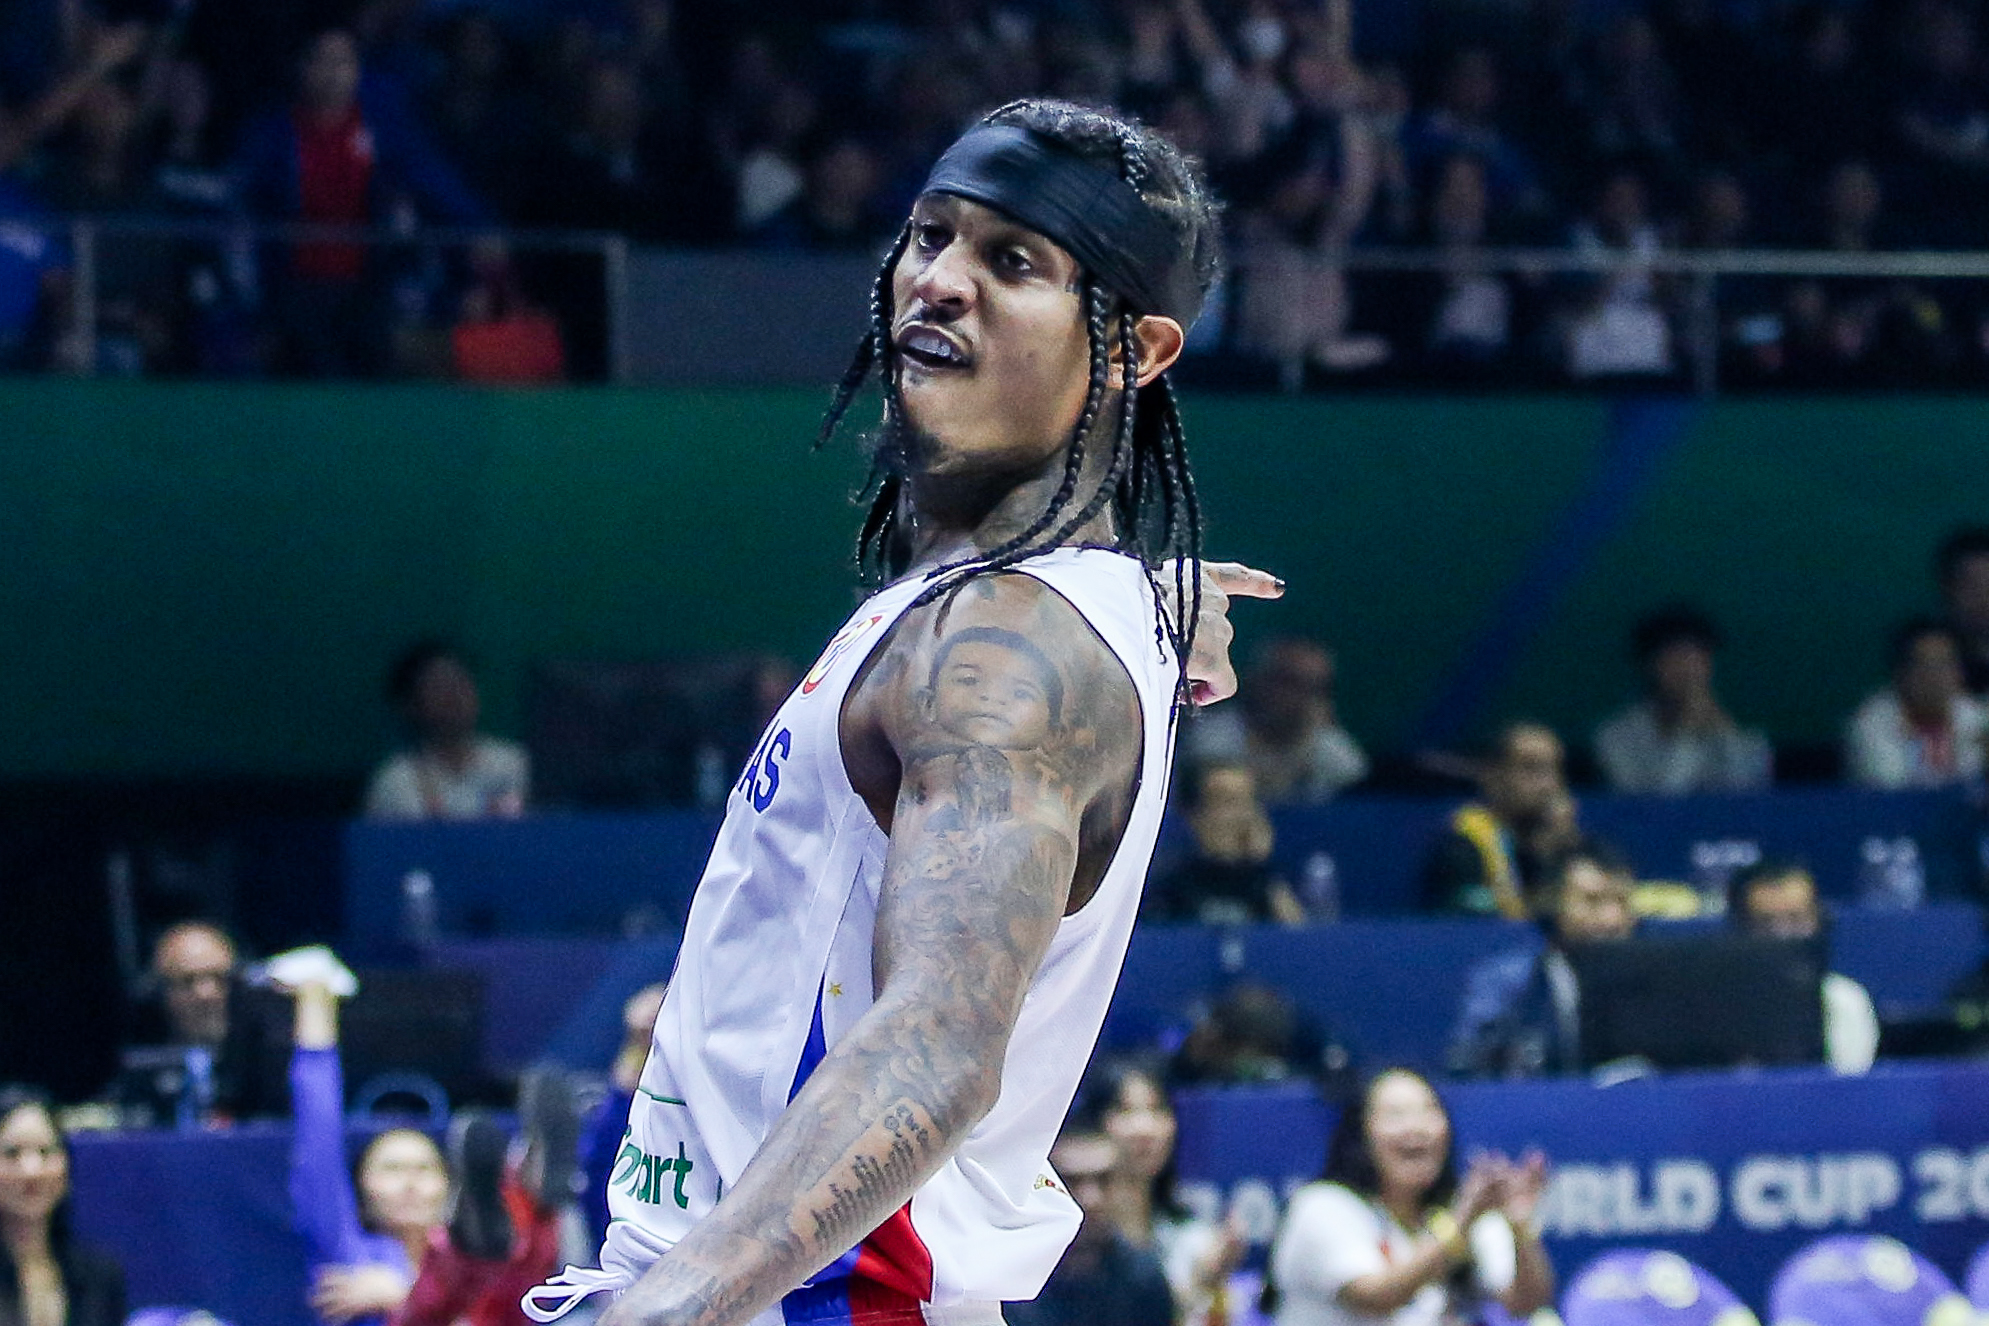 Clarkson explodes for 34 points, leads Gilas Pilipinas to first